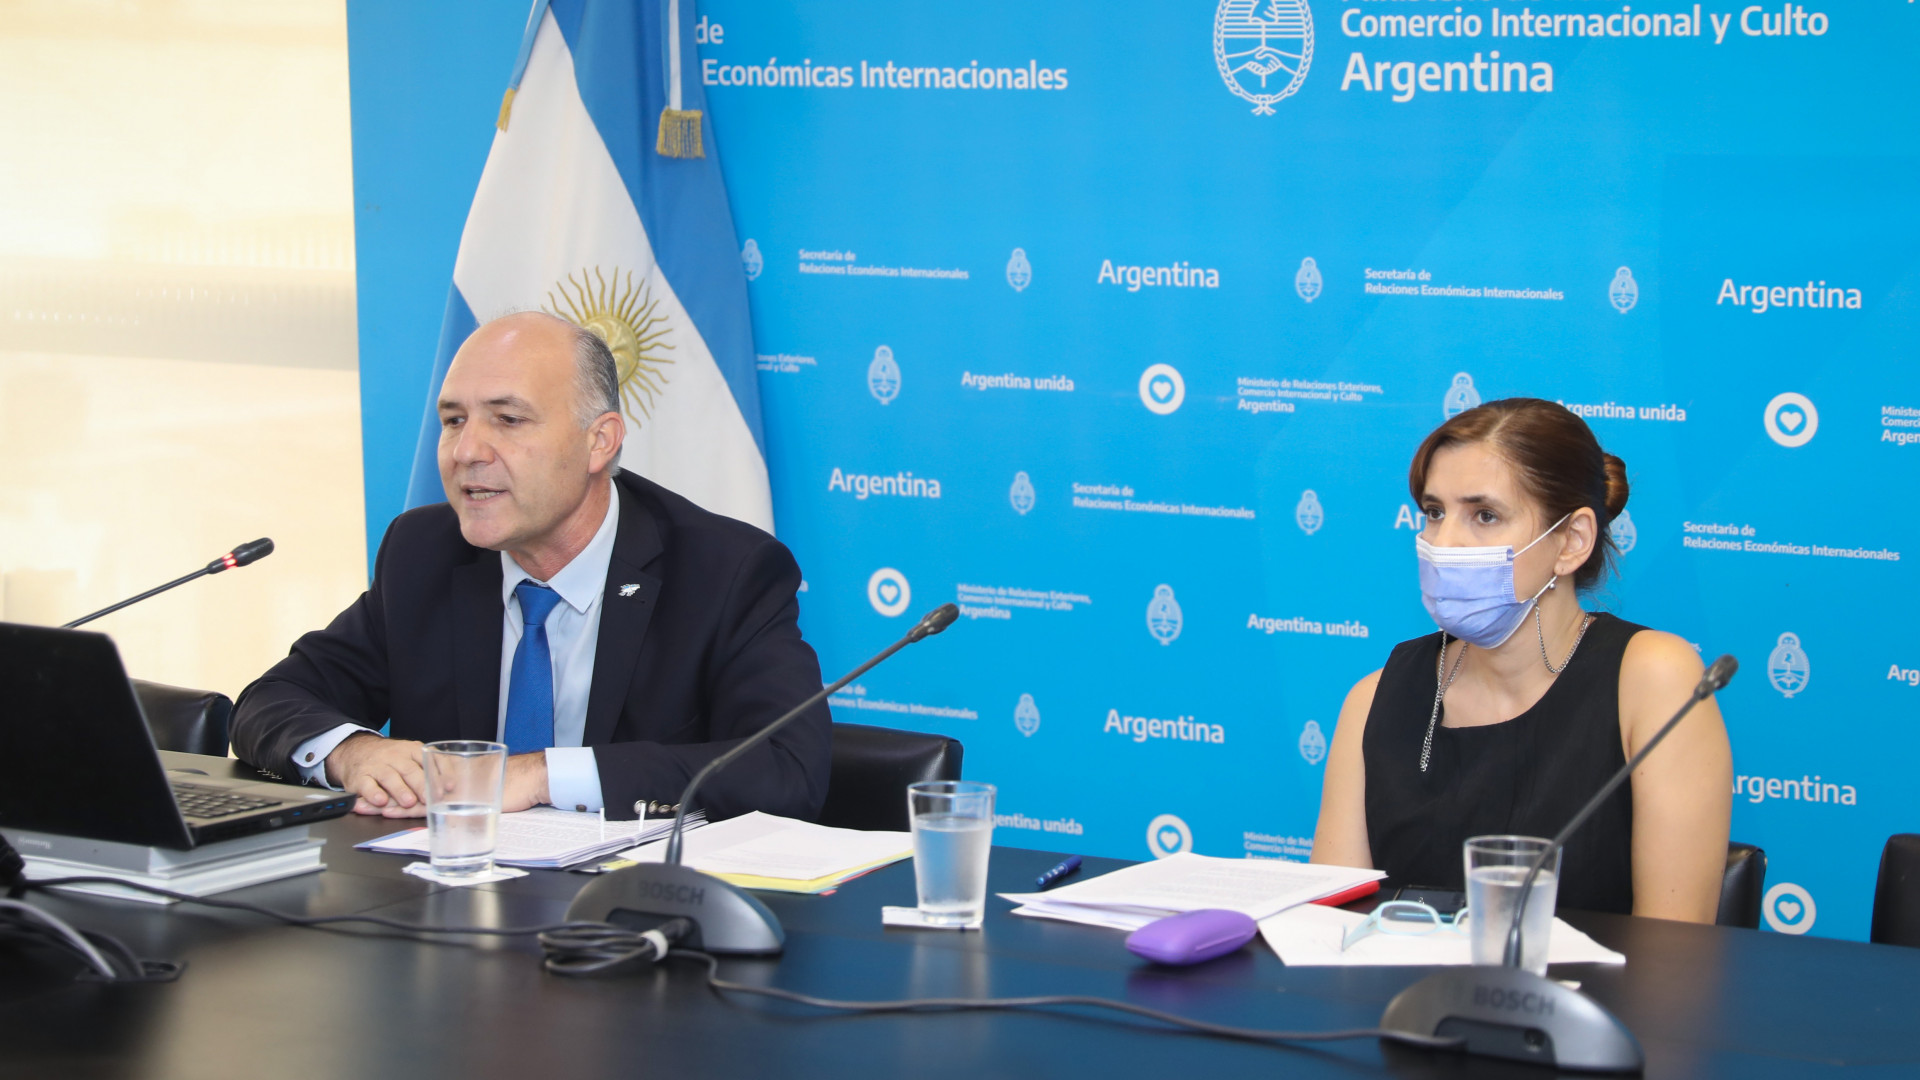 “Malvinas: The Board of Directors of the UN Special Committee on Decolonization reaffirms its support for the resumption of negotiations between Argentina and the UK”